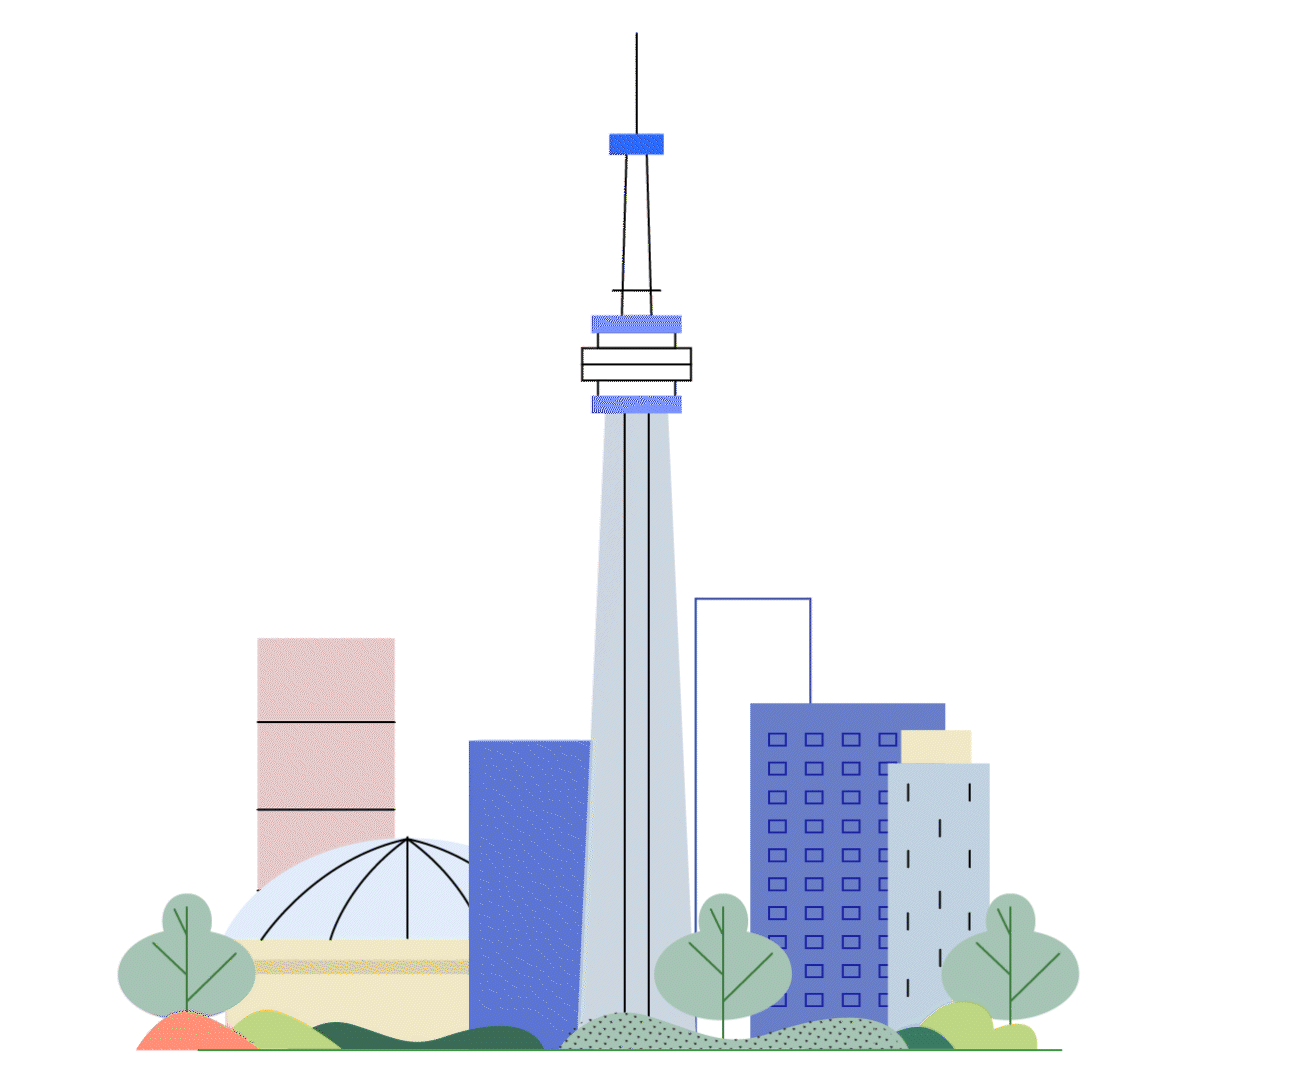 Toronto Property Management symbolized through illustrated iconic buildings in Toronto and animation of days passing